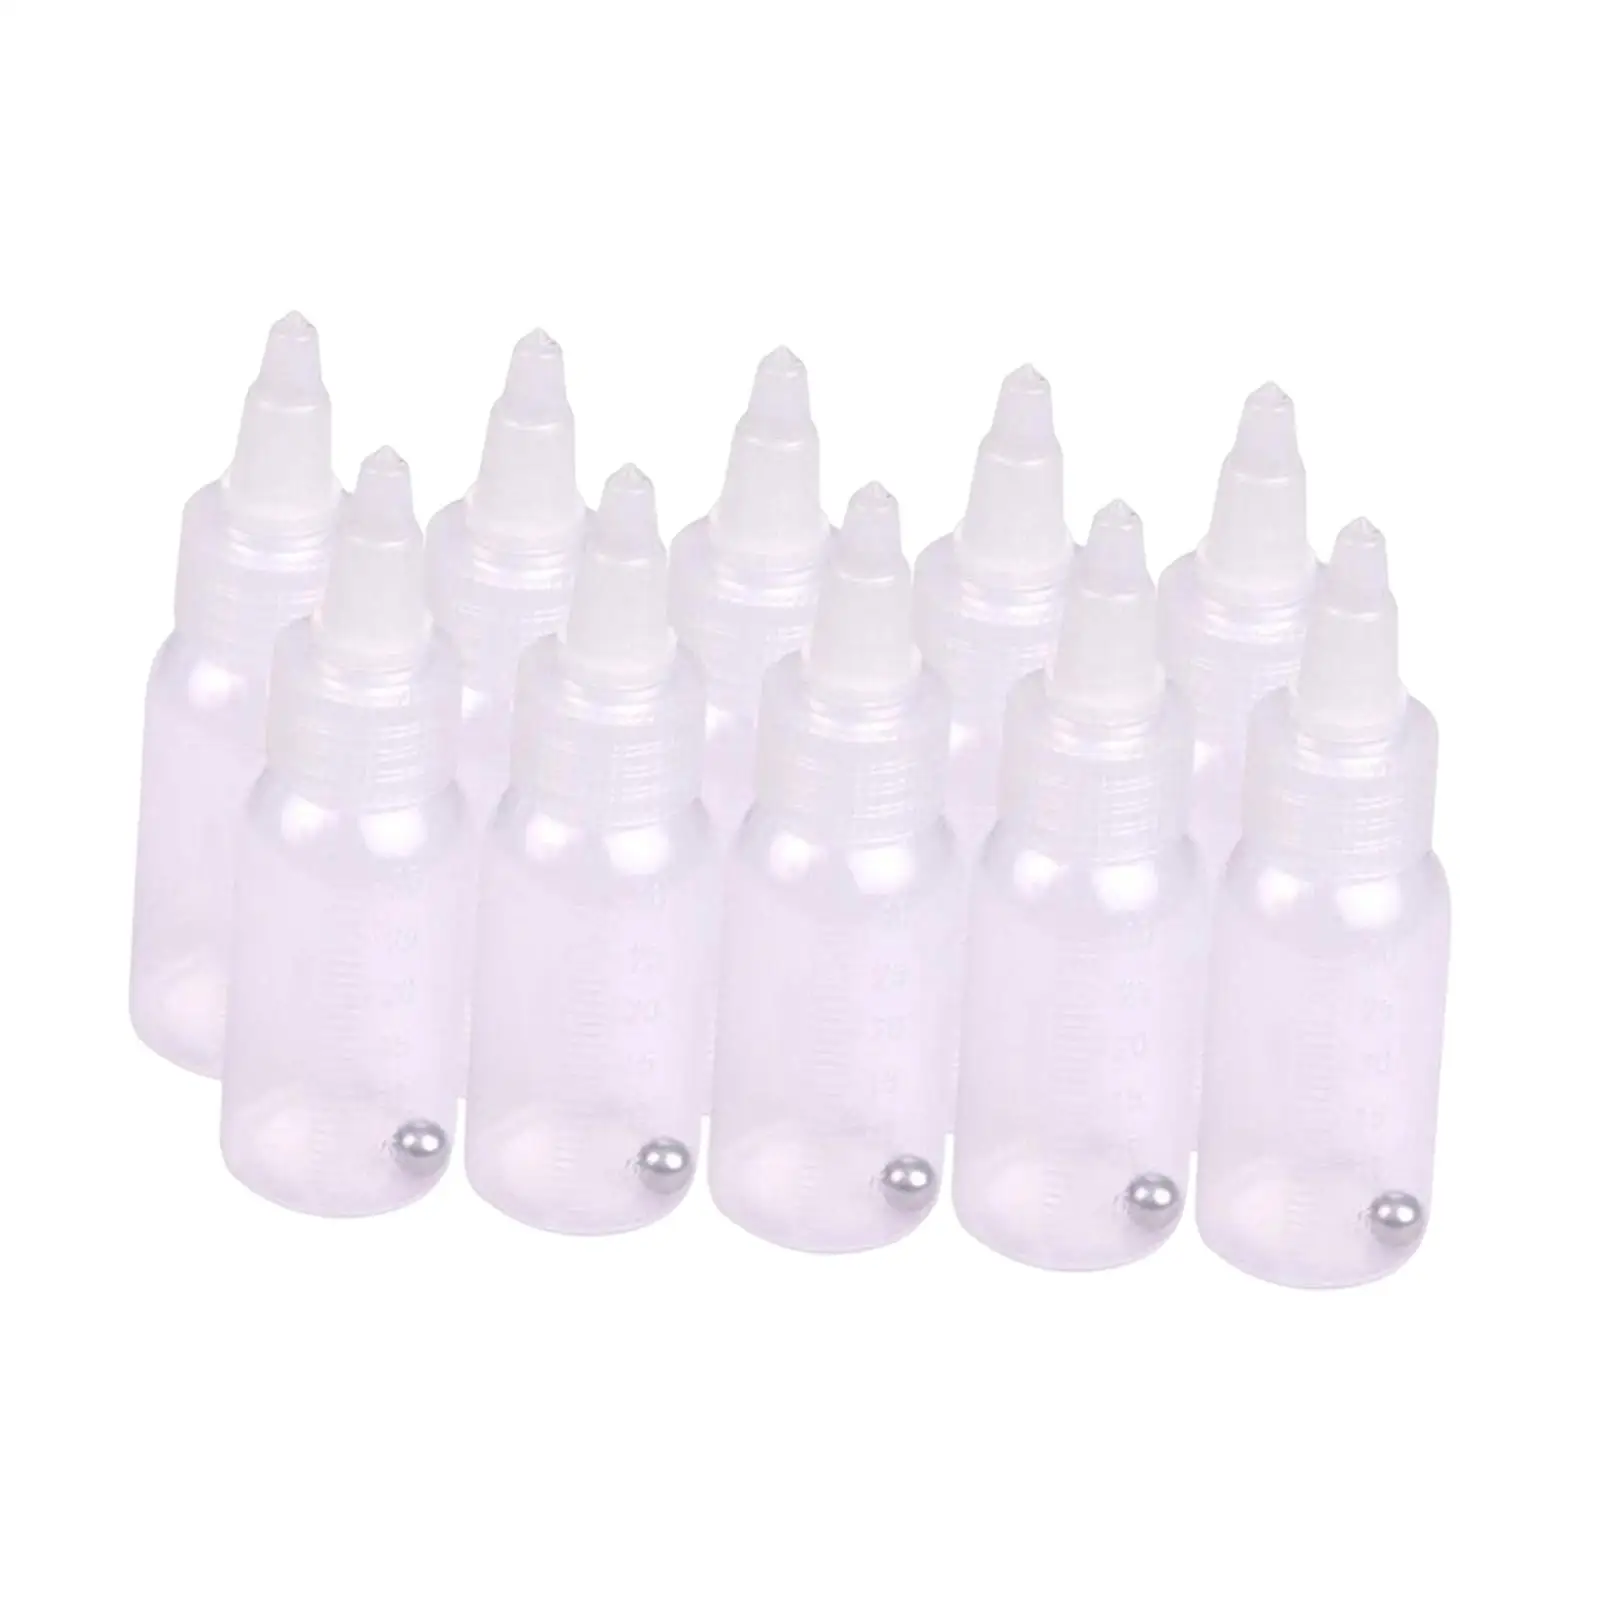 10Pcs 30ml Paint Dropper Bottles with Mixing Bead Mixed for Arts Model Paint